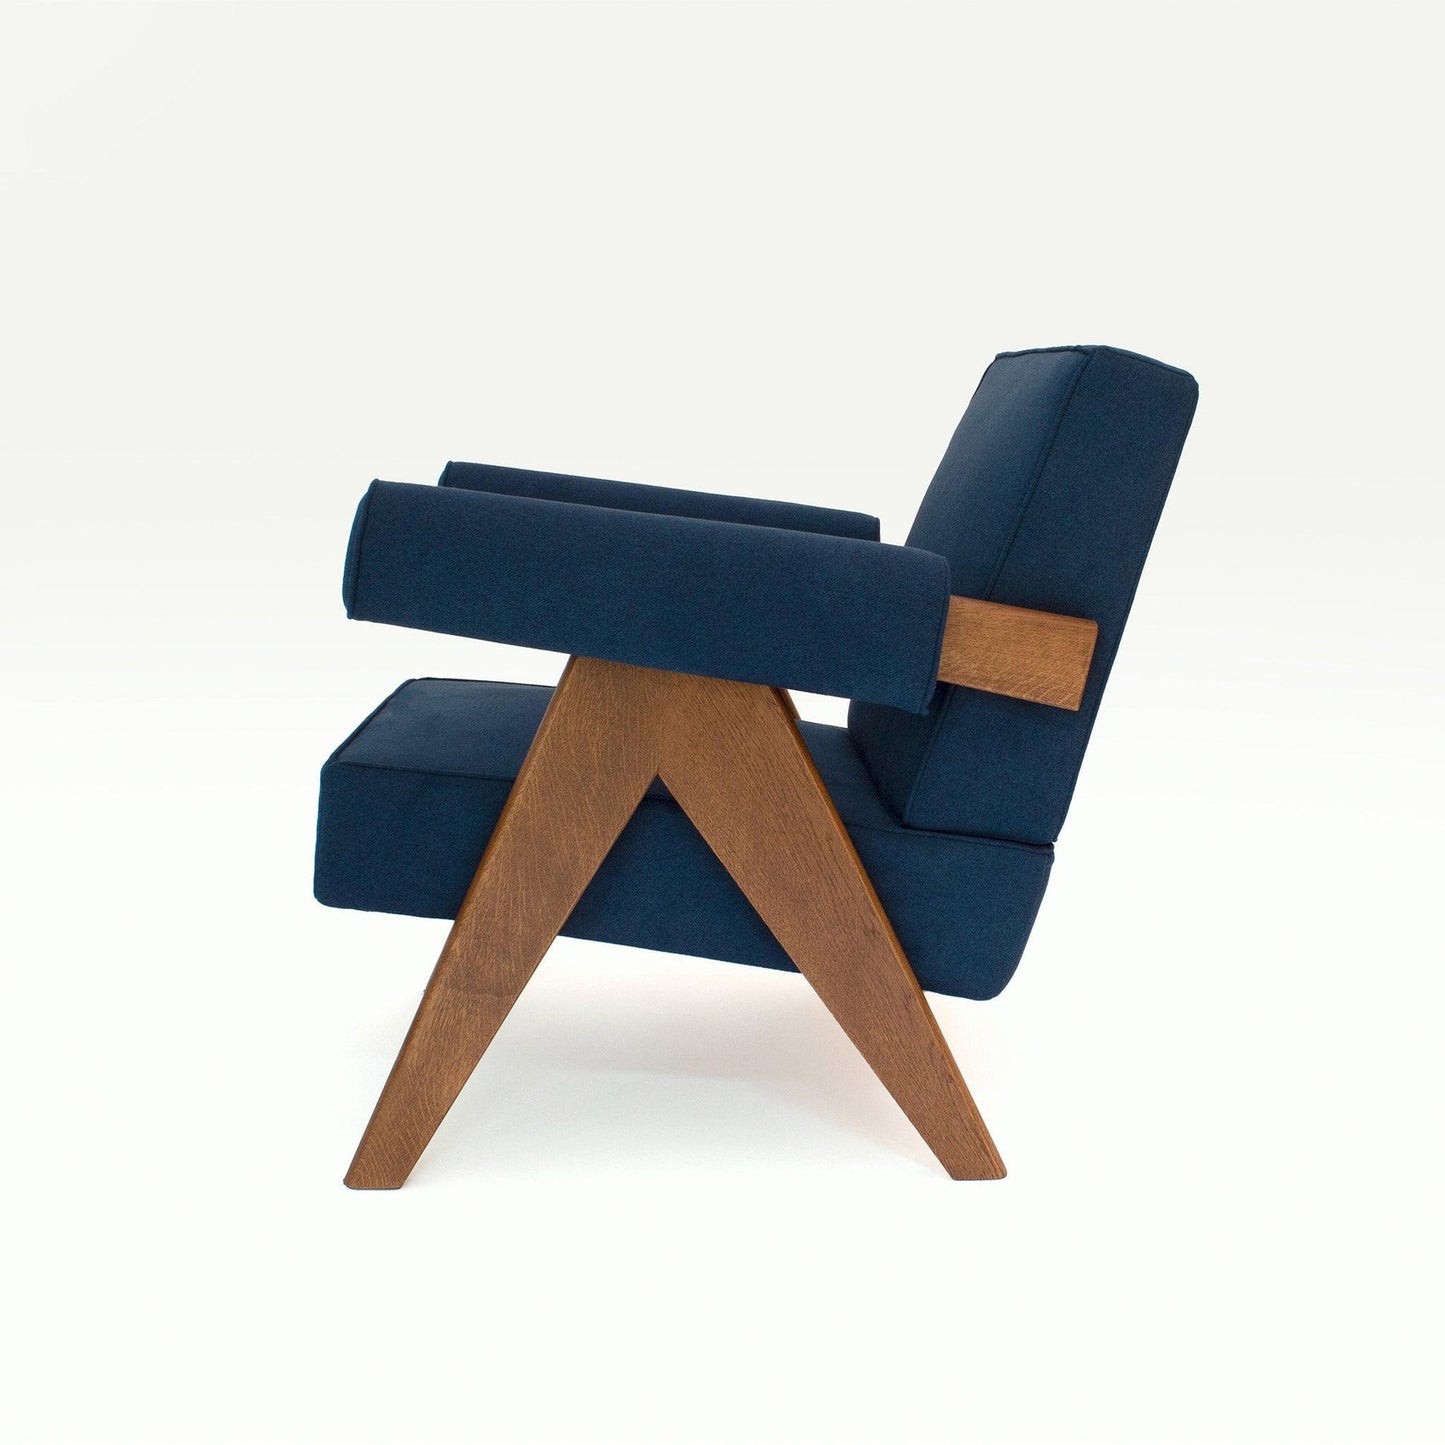 Pierre Jeanneret, upholstered easy chair